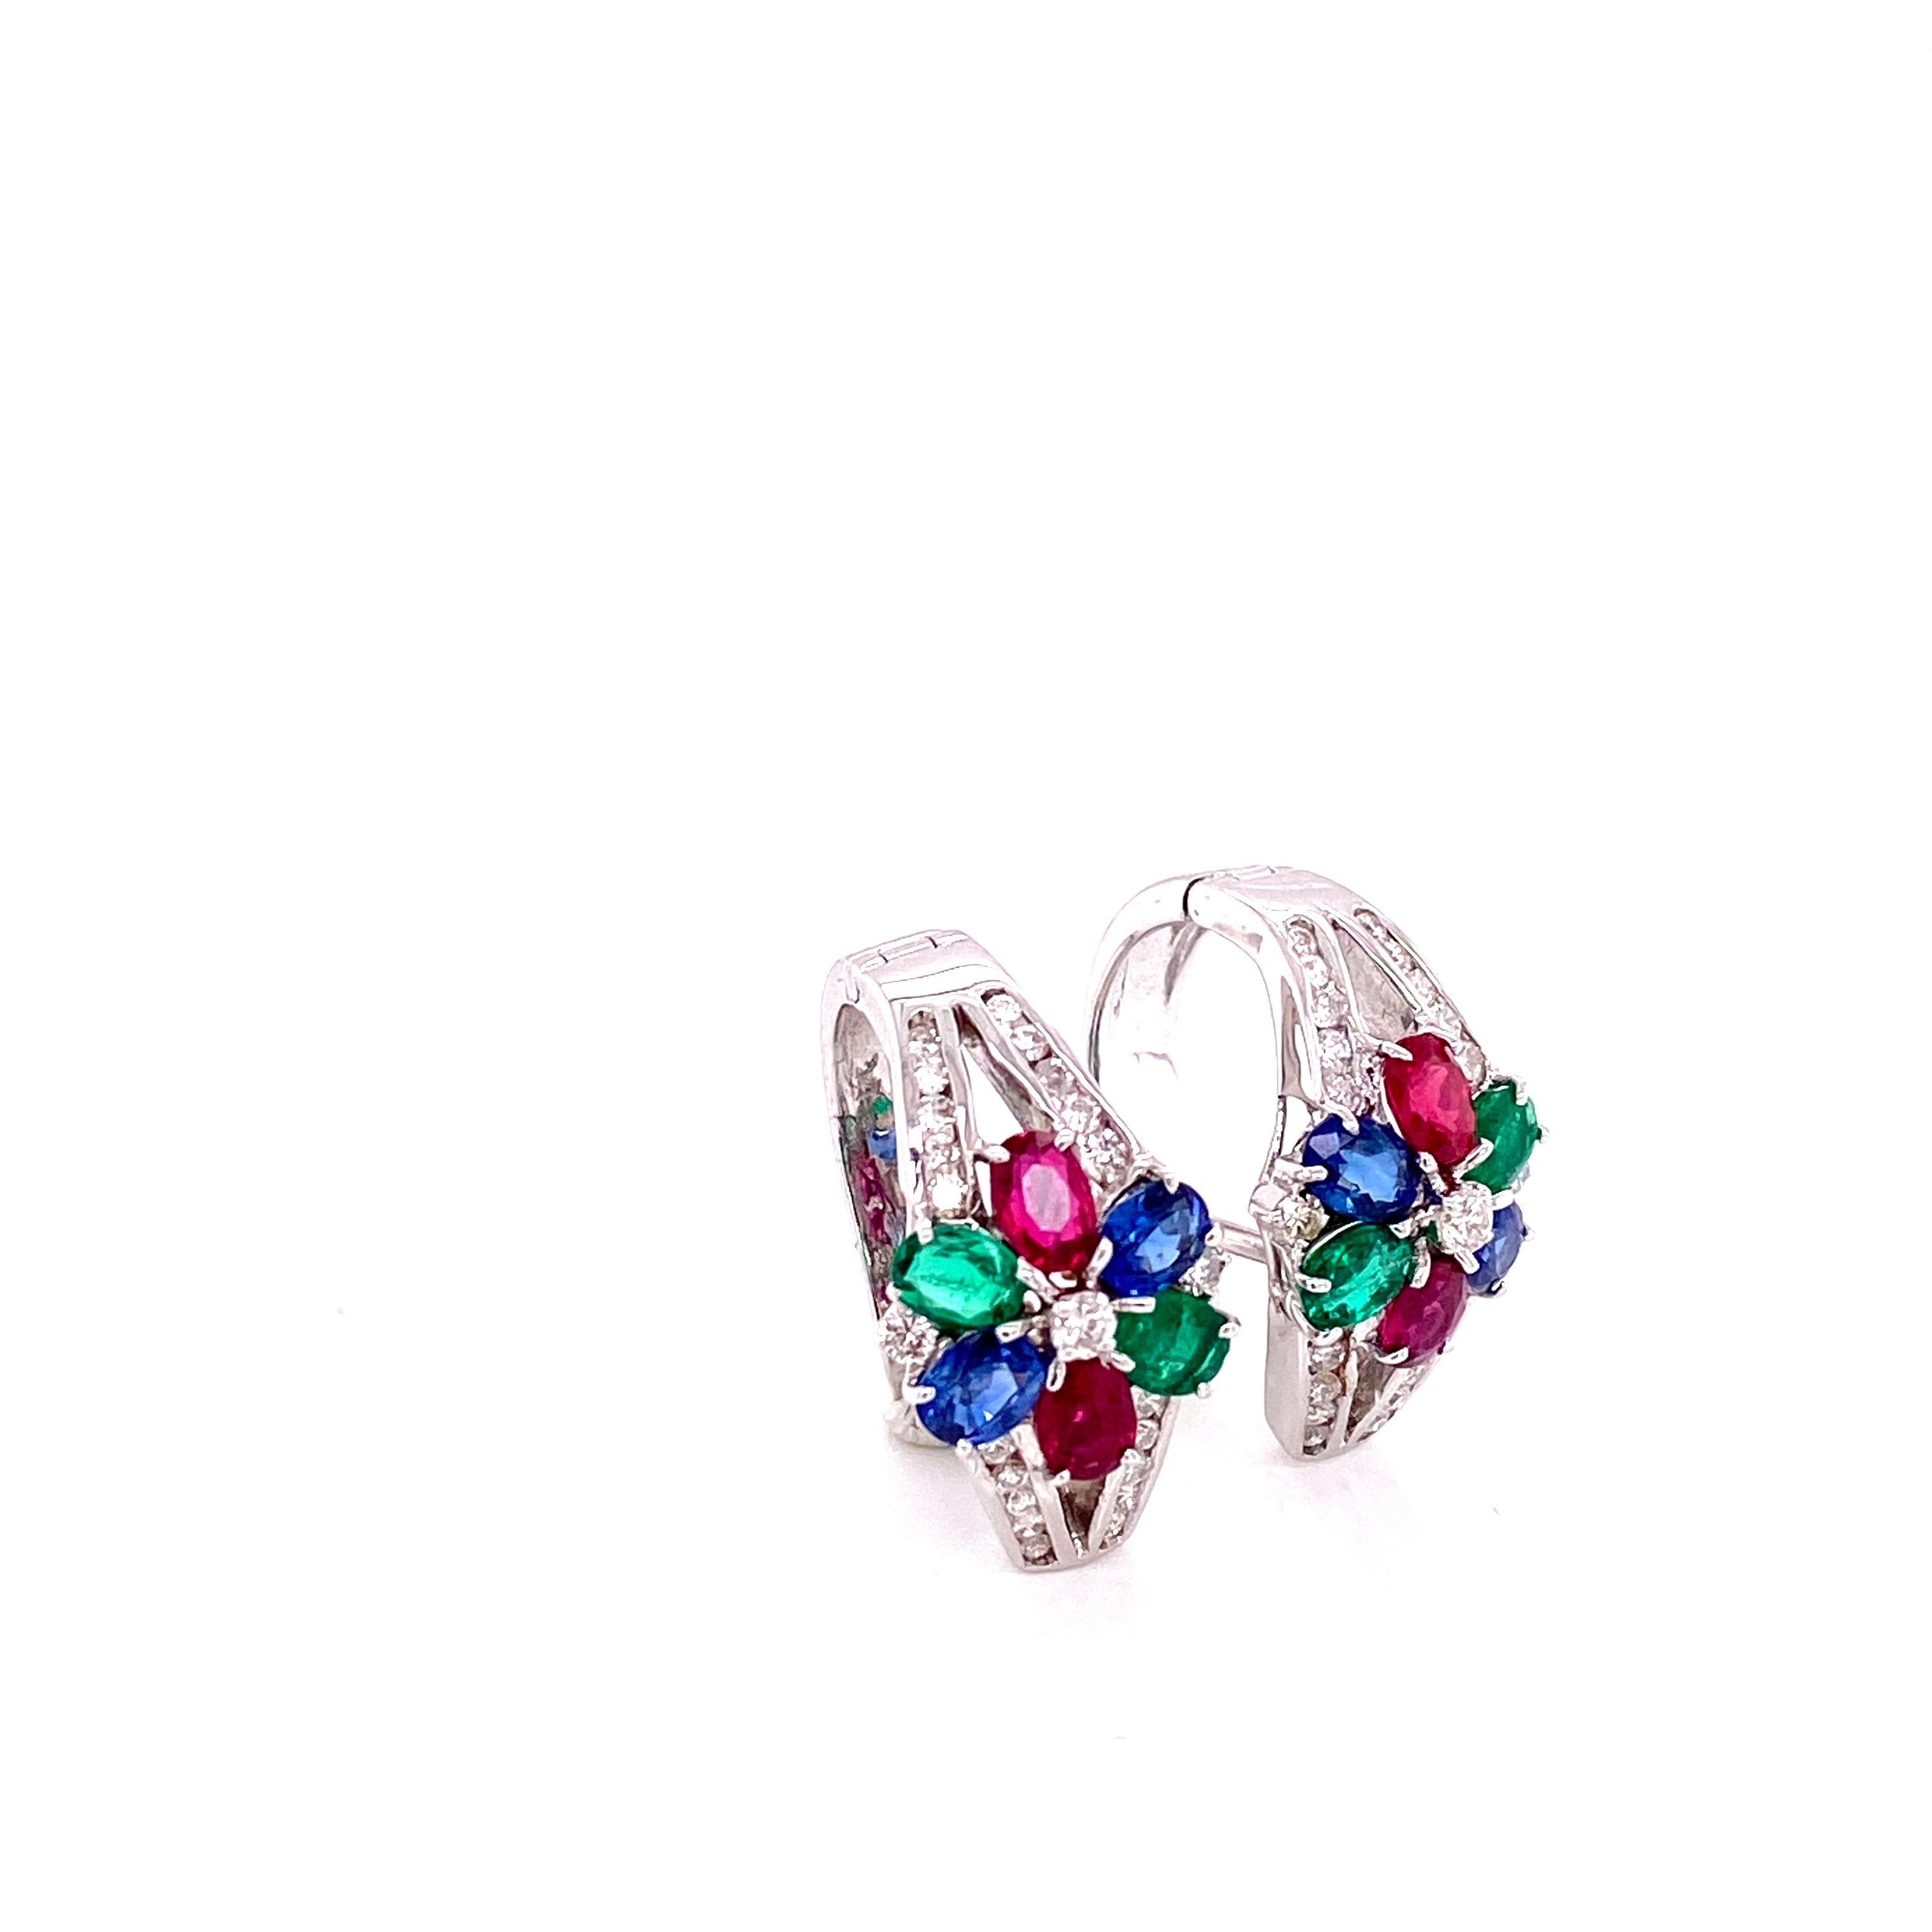 Oval Cut Art Deco Style Emerald, Ruby, Blue Sapphire, and White Diamond Earrings